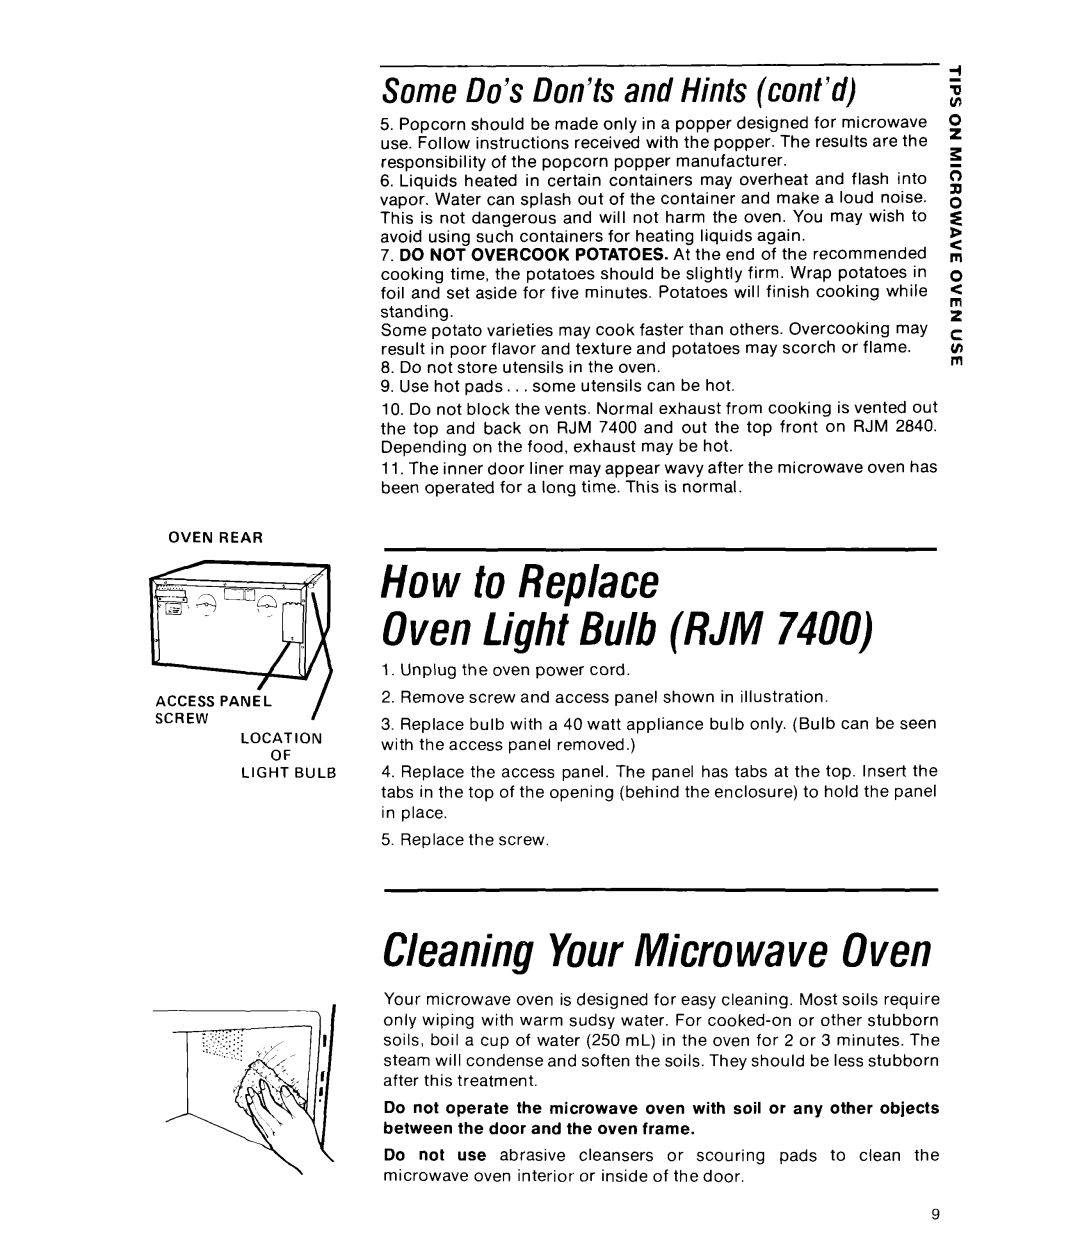 Whirlpool RJM 2840 manual How to Replace OvenLight Bulb RJM, CleaningYourMicrowave Oven, Some Do’s Don’ts and Hints cont’d 